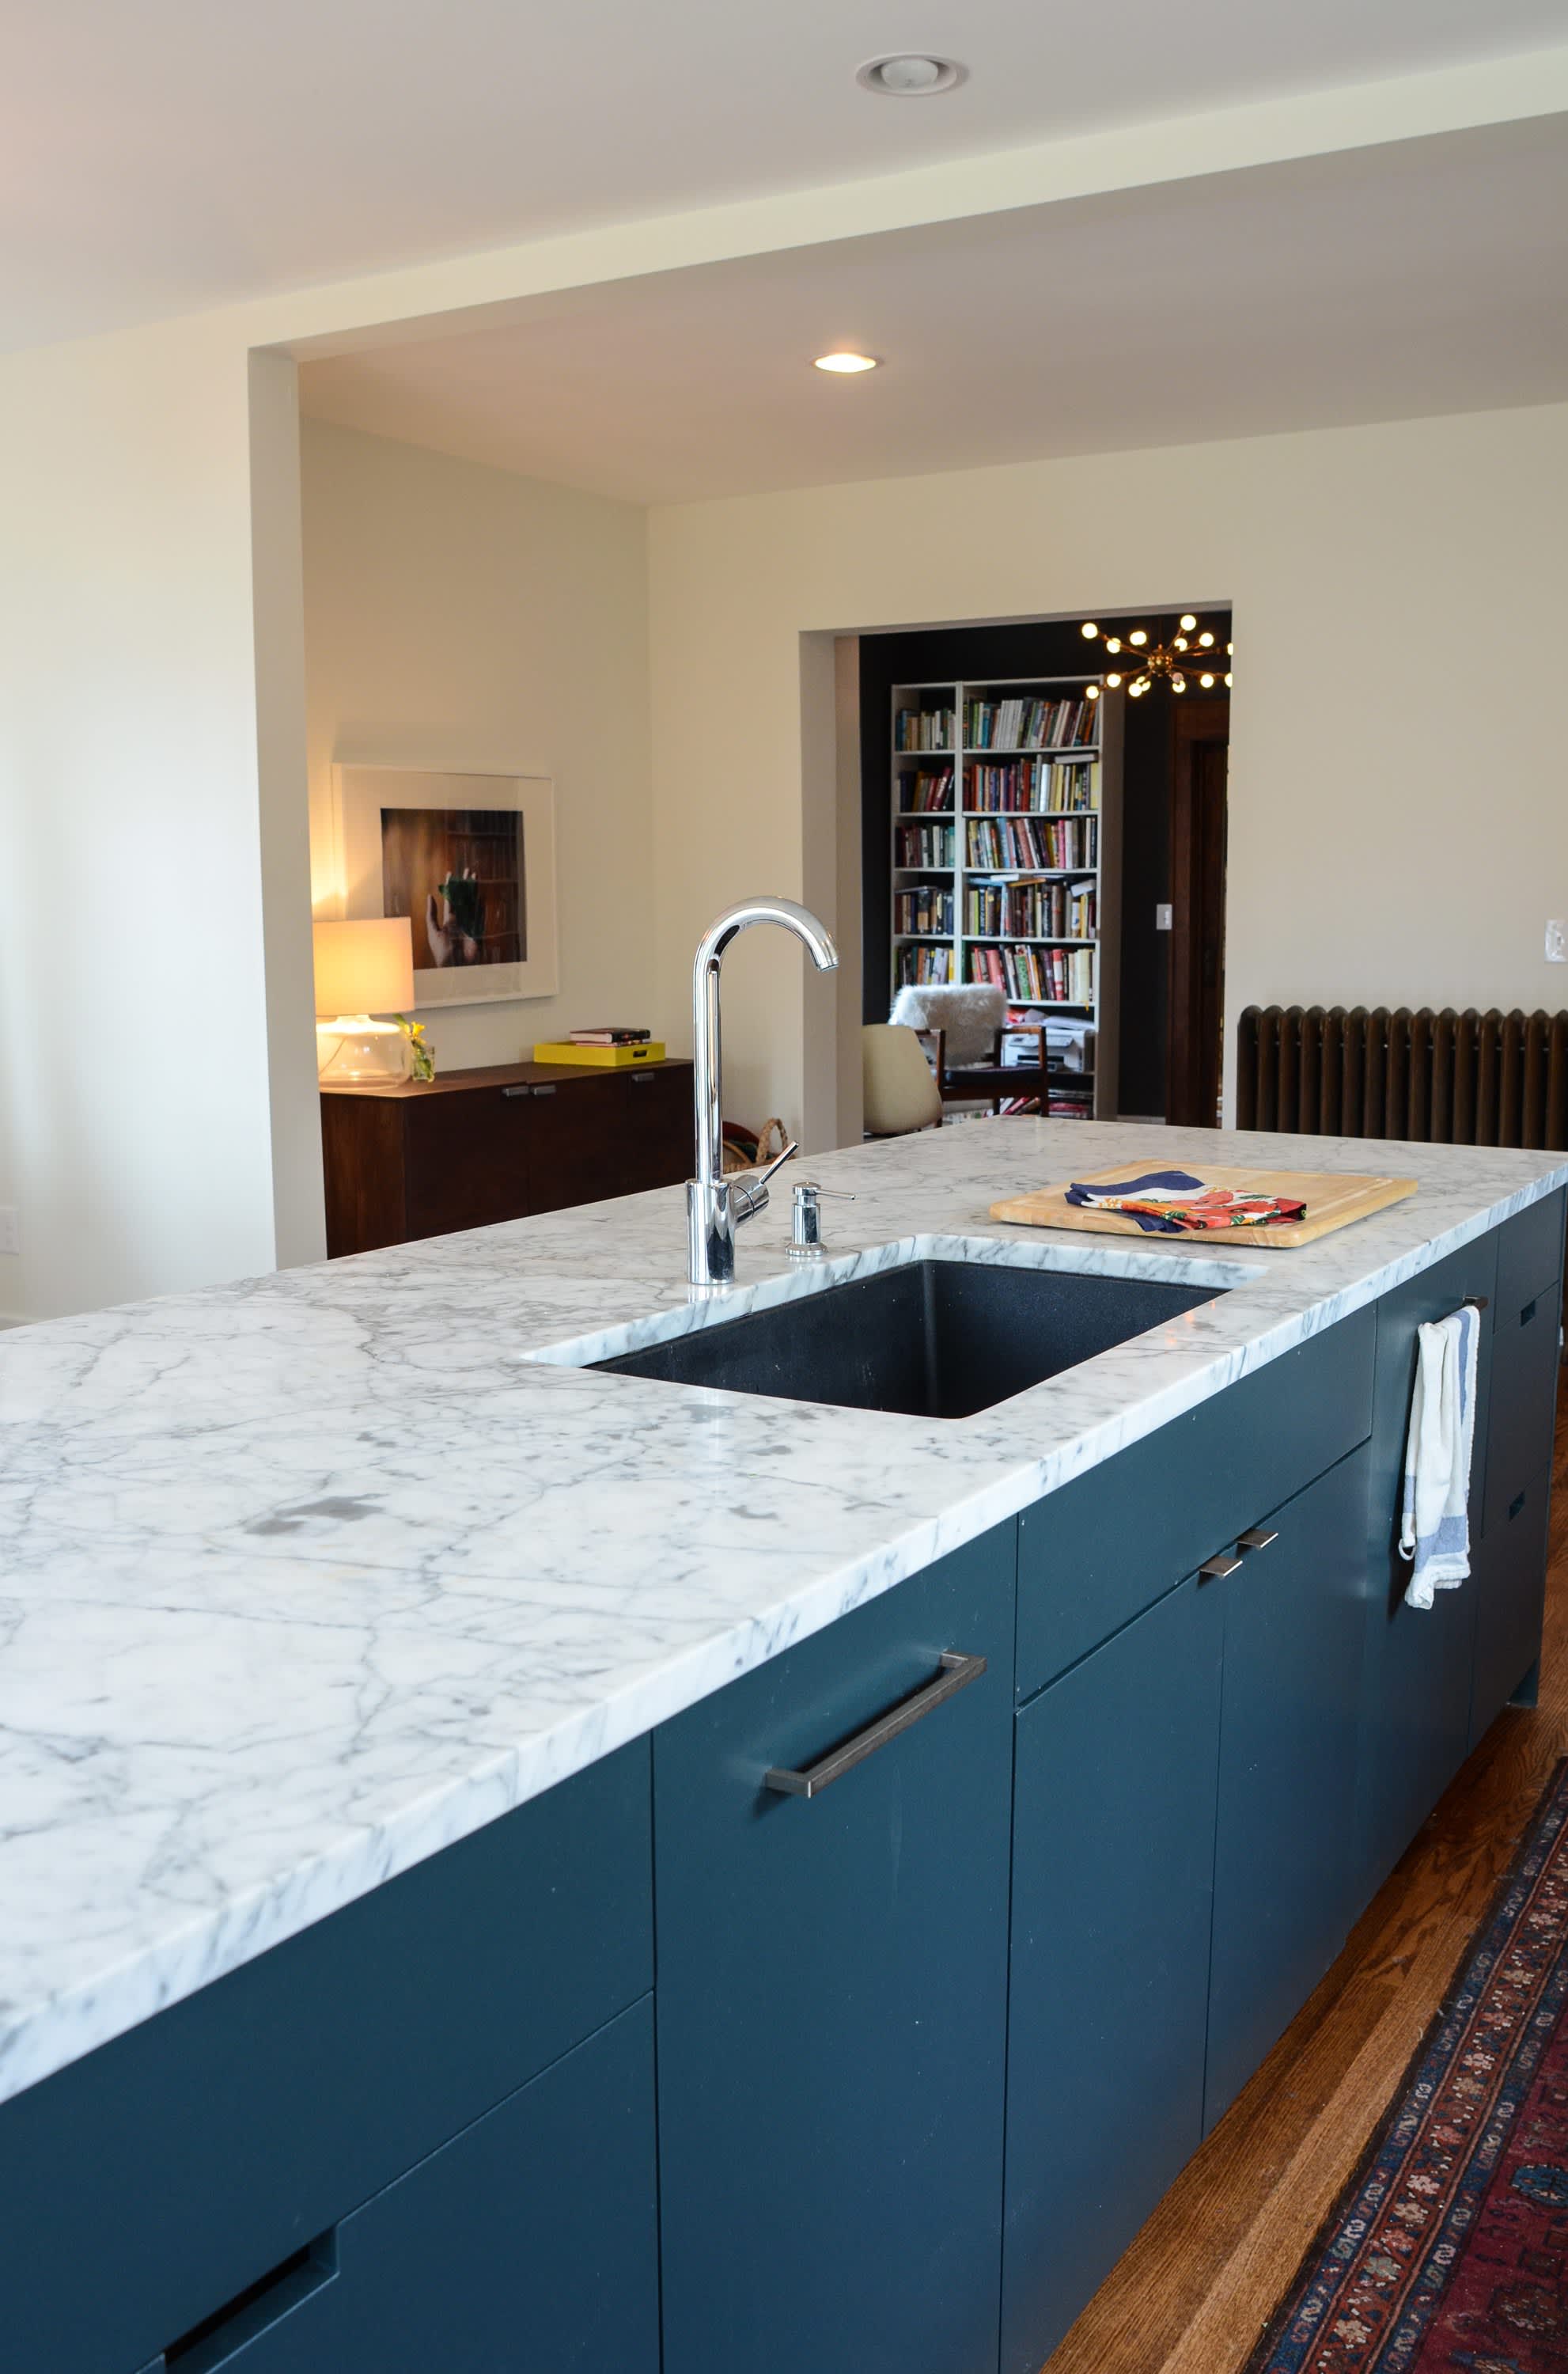 My Experience Of Living With Marble Countertops One Year Later